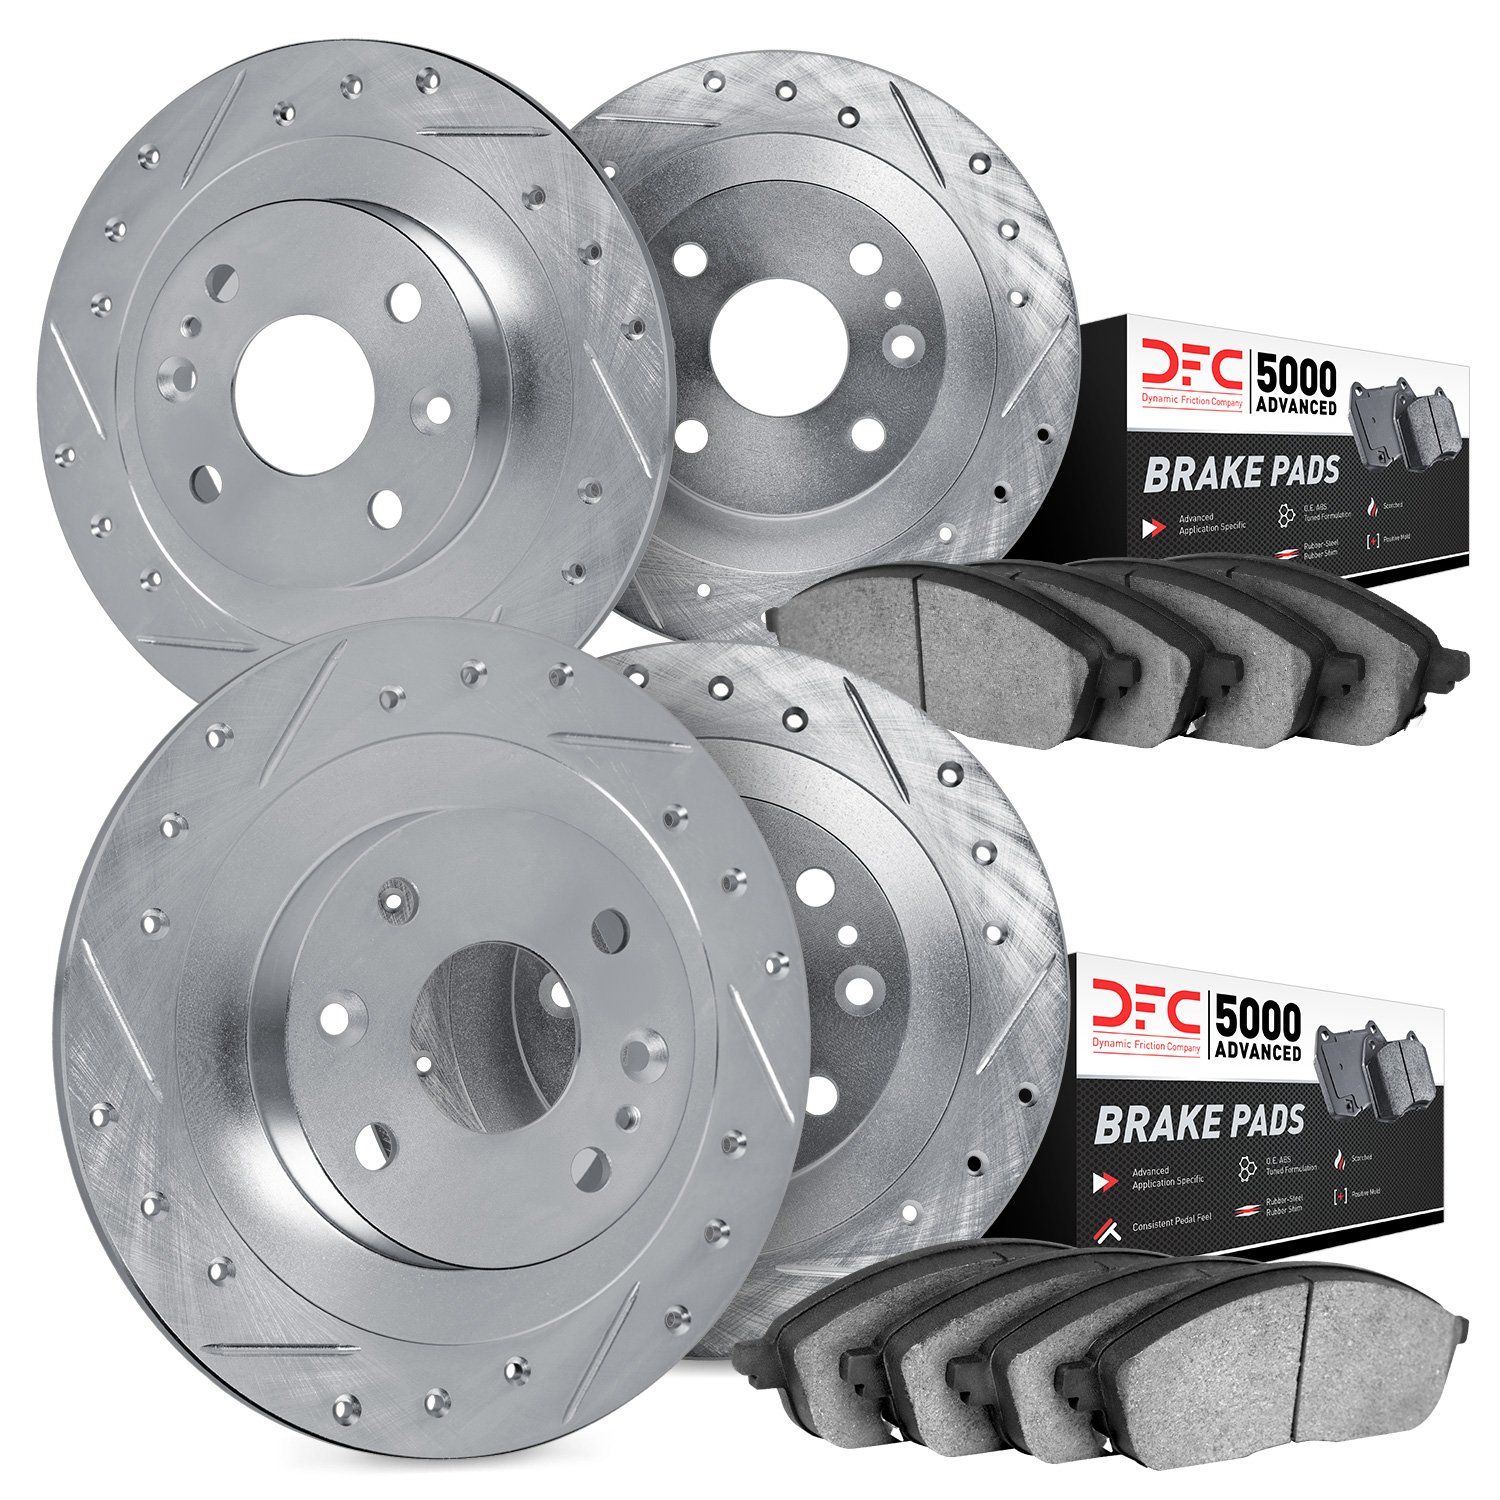 7504-28001 Drilled/Slotted Brake Rotors w/5000 Advanced Brake Pads Kit [Silver], 1980-1989 Peugeot, Position: Front and Rear